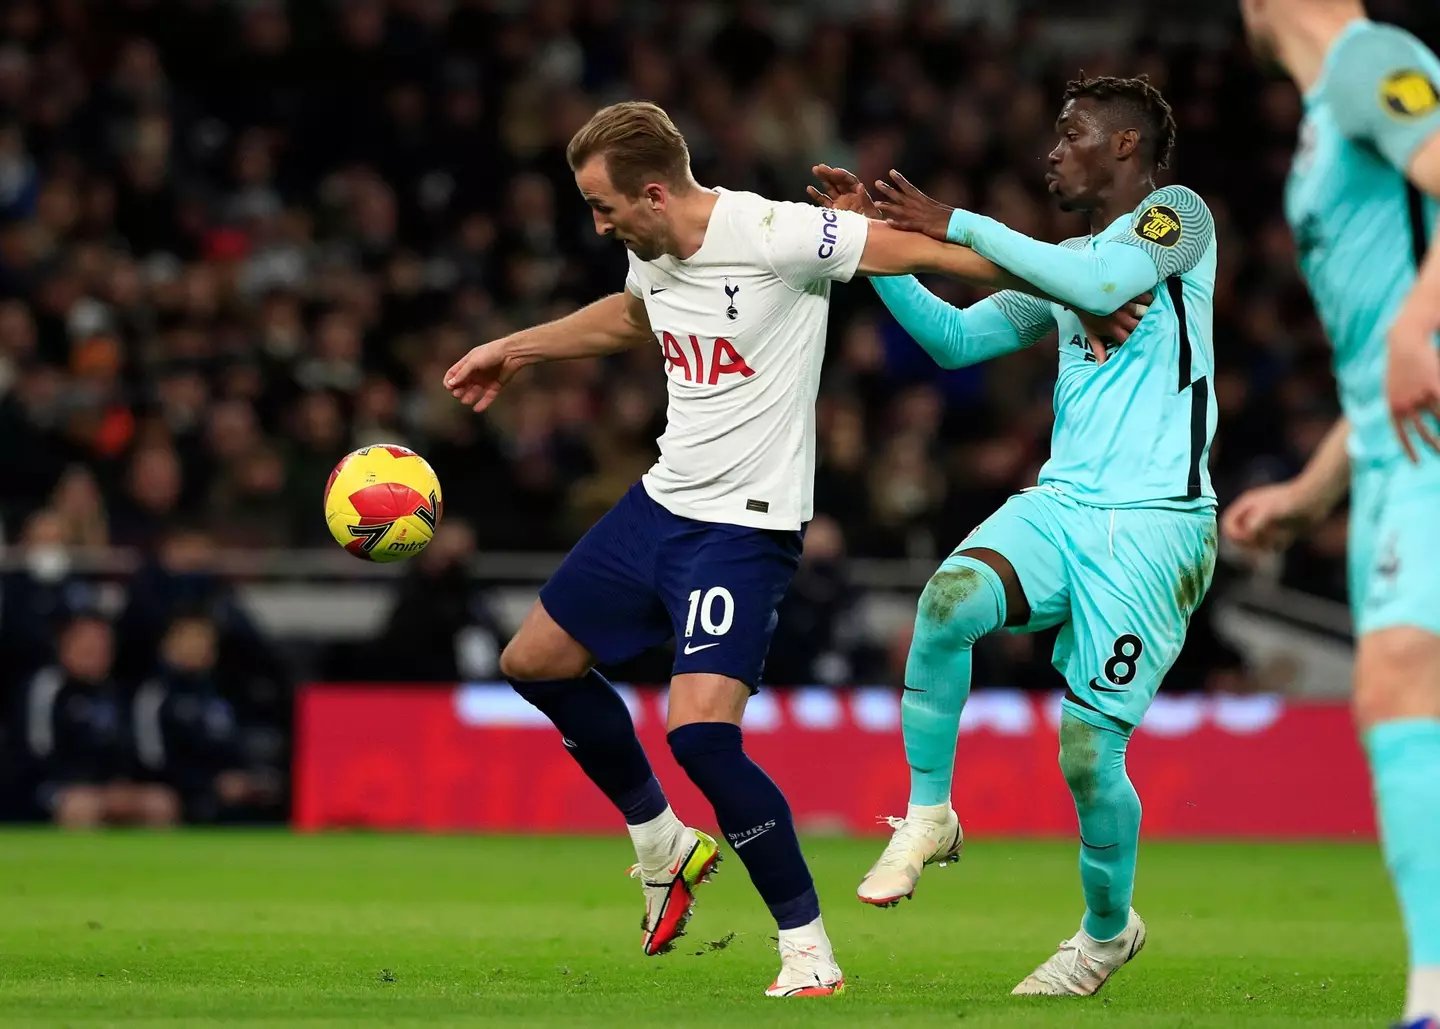 Harry Kane of Tottenham Hotspur holds off Yves Bissouma of Brighton in an FA Cup clash. Image credit: Alamy